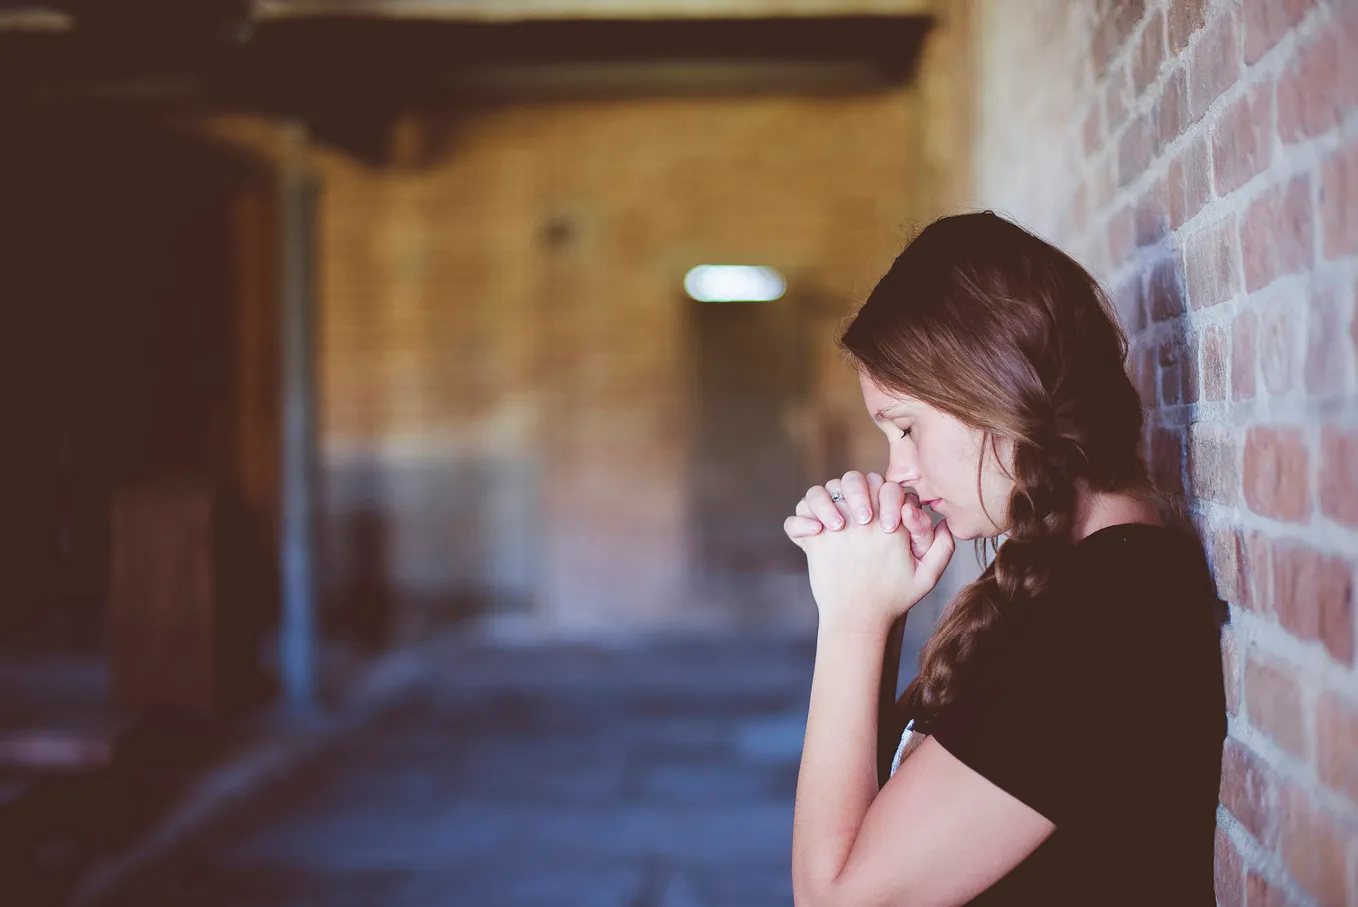 Young teenage girl with brown hair in a braid. Wearing a short sleeved black T-shirt, she is leaning against a brick wall, holding her hands in a prayer position in front of the lower part of her face. The eyes are closed.